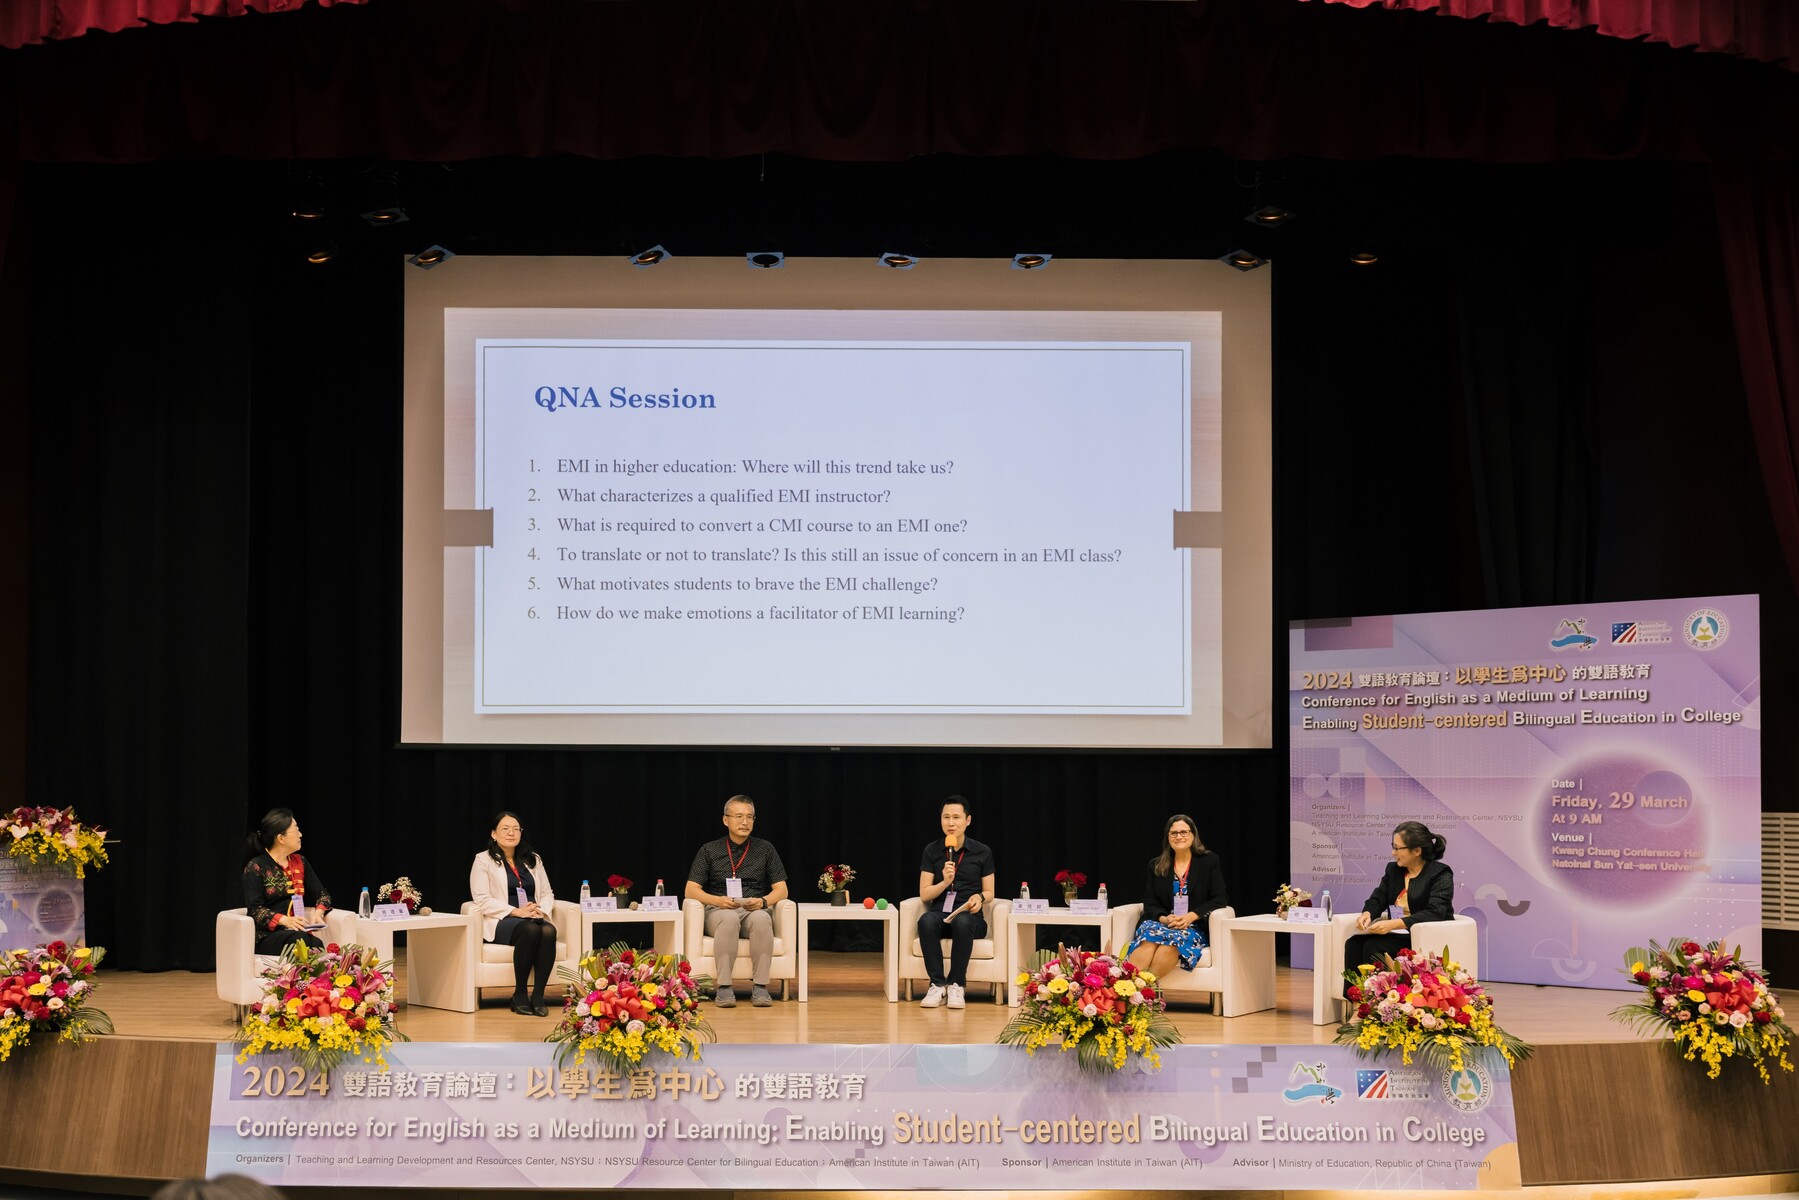 National Sun Yat-sen University (NSYSU) hosted the bilingual education forum "Conference for English as a Medium of Learning: Enabling Student-centered Bilingual Education in College" in collaboration with the American Institute in Taiwan (AIT).